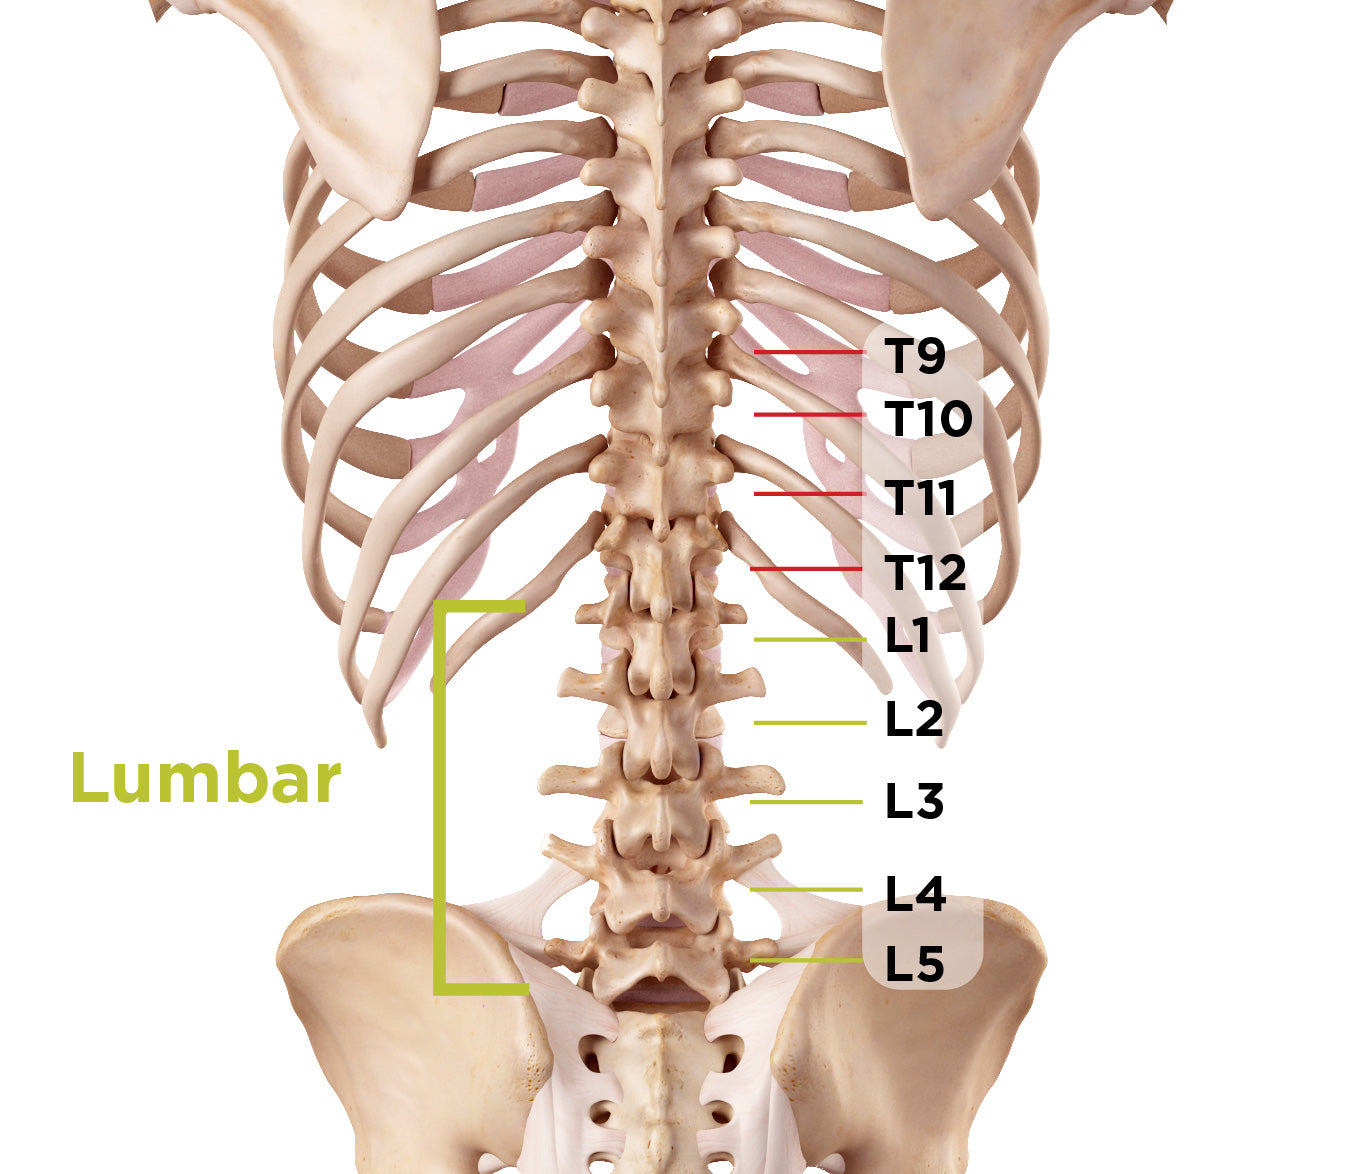 Lumbar back pain from spondylolisthesis and how to treat it with a back brace